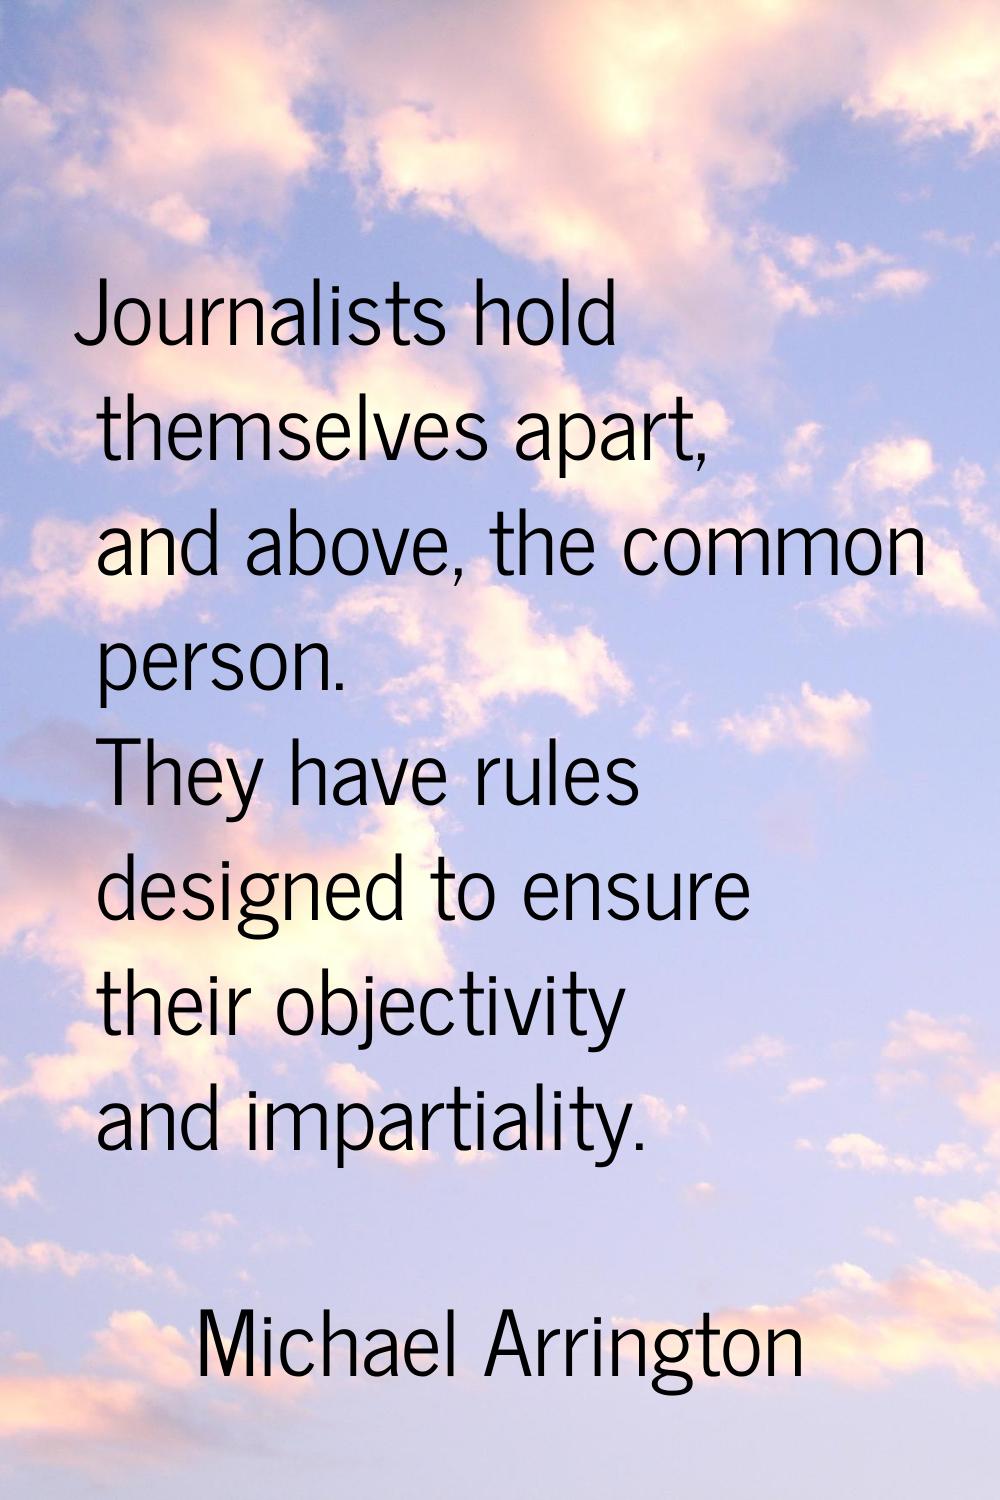 Journalists hold themselves apart, and above, the common person. They have rules designed to ensure